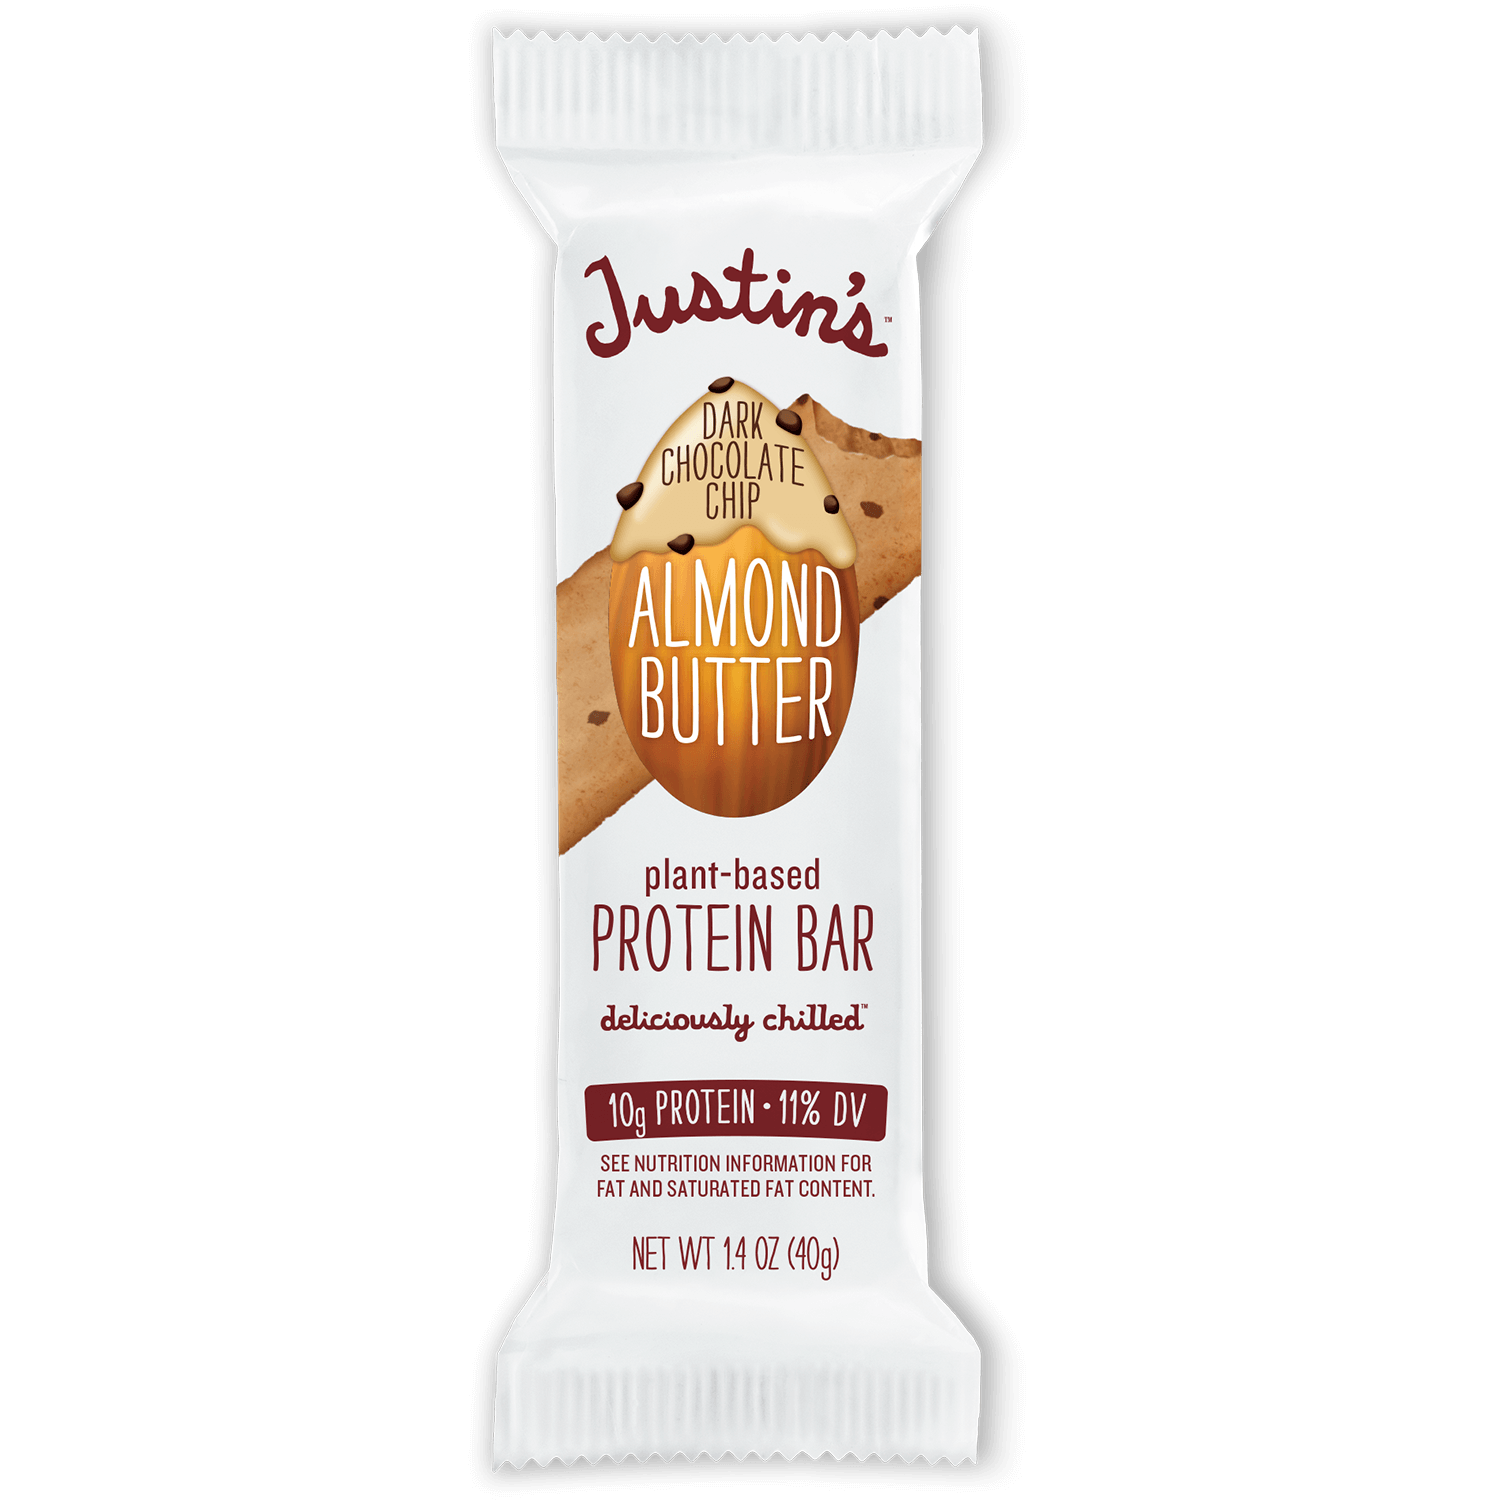 Justin's Dark Chocolate Chip Almond Butter plant-based Protein Bar 1.4 oz